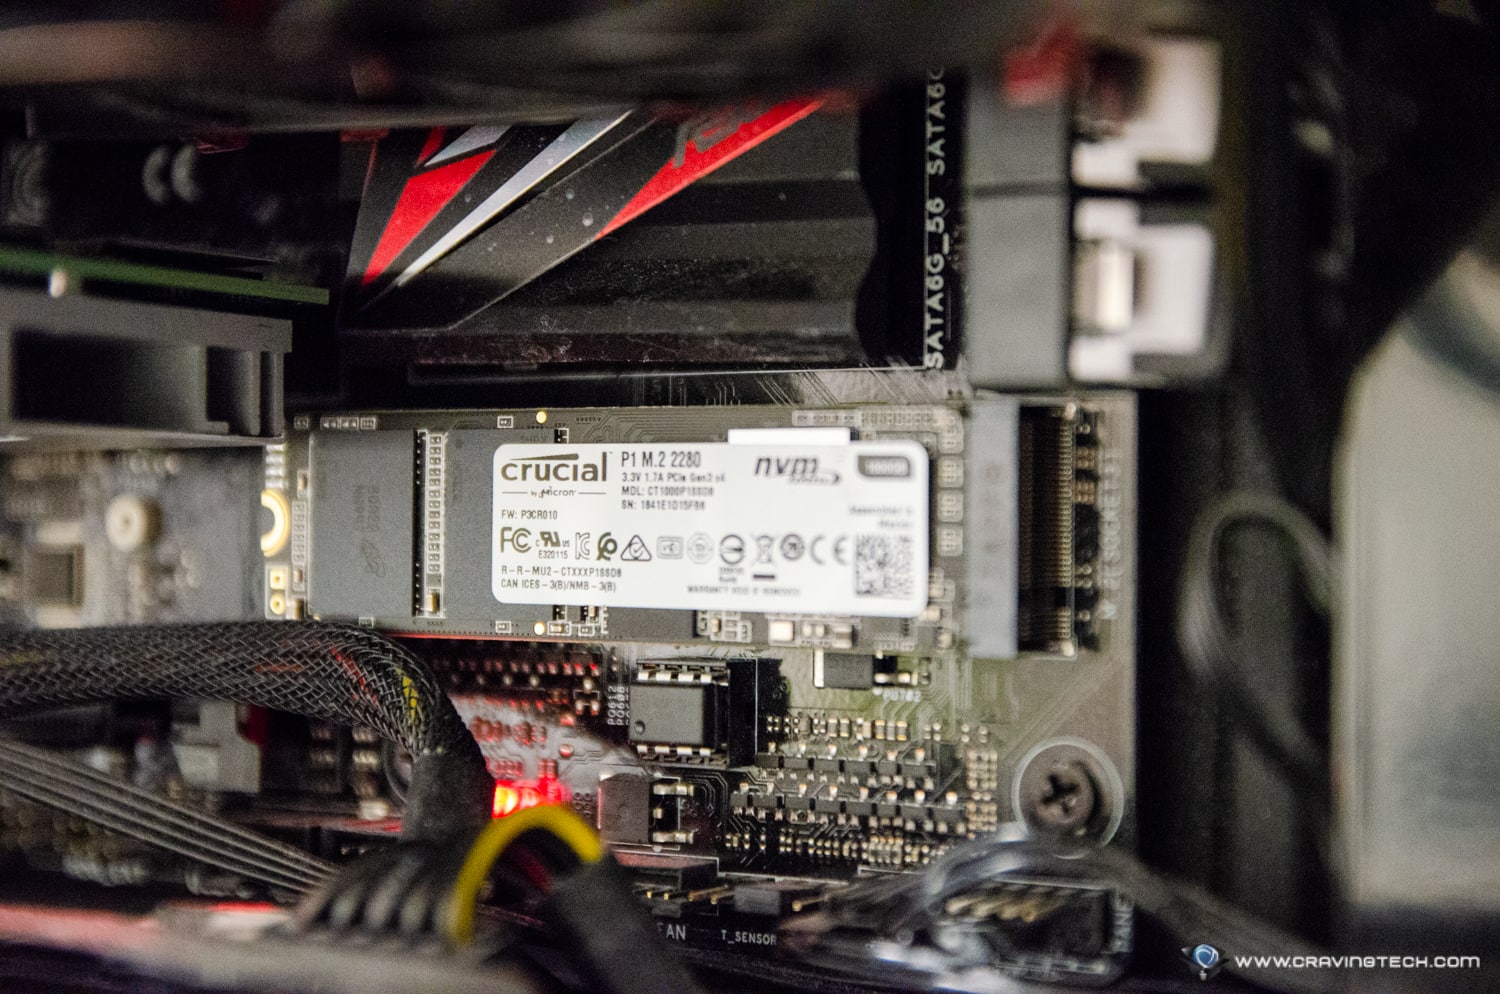 Crucial’s first NVMe SSD in the consumers market – Crucial P1 SSD (NVMe M.2) Review